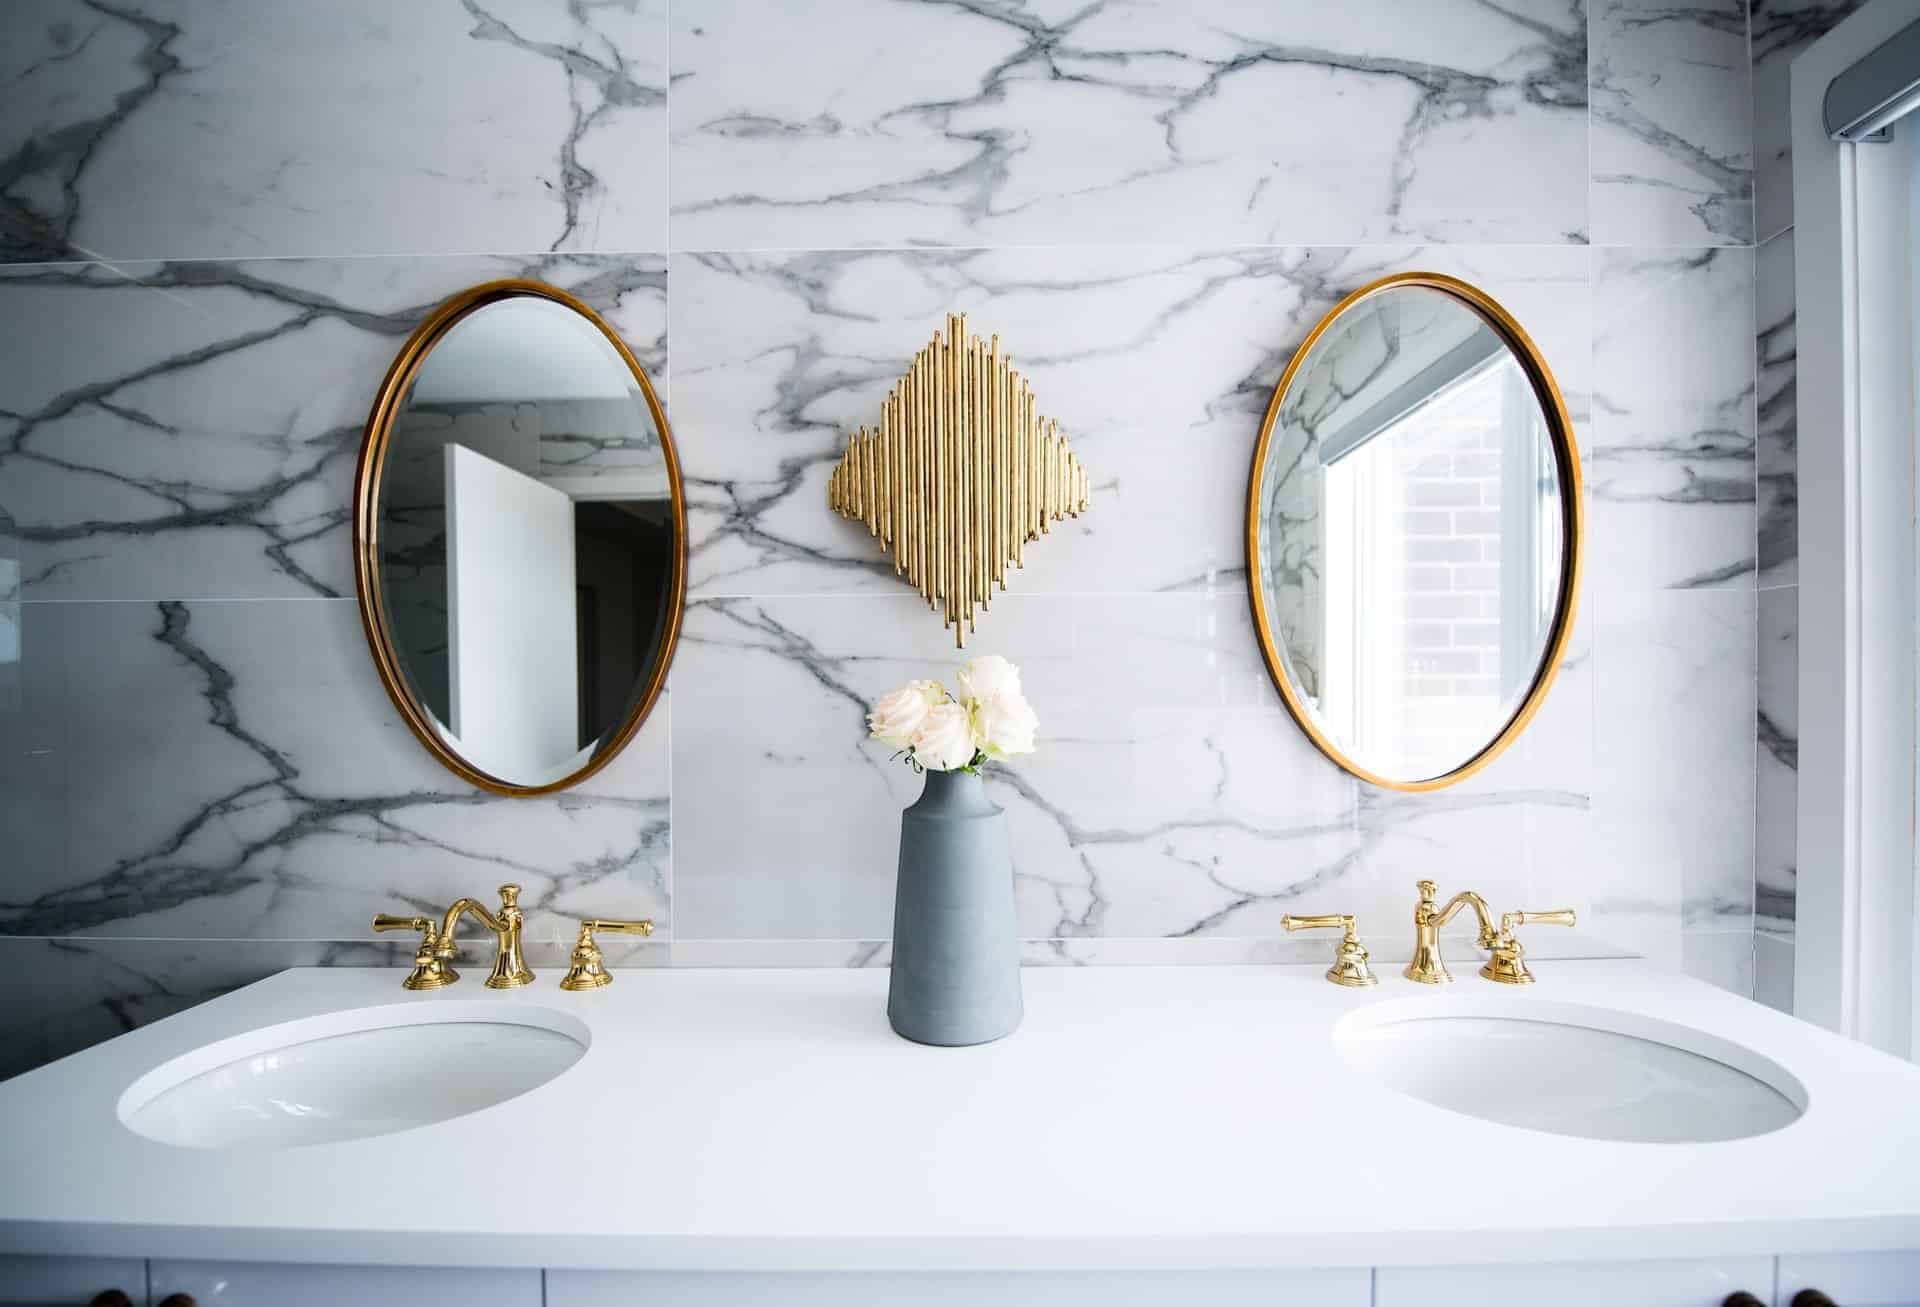 Bathroom in glamour style – how to arrange?